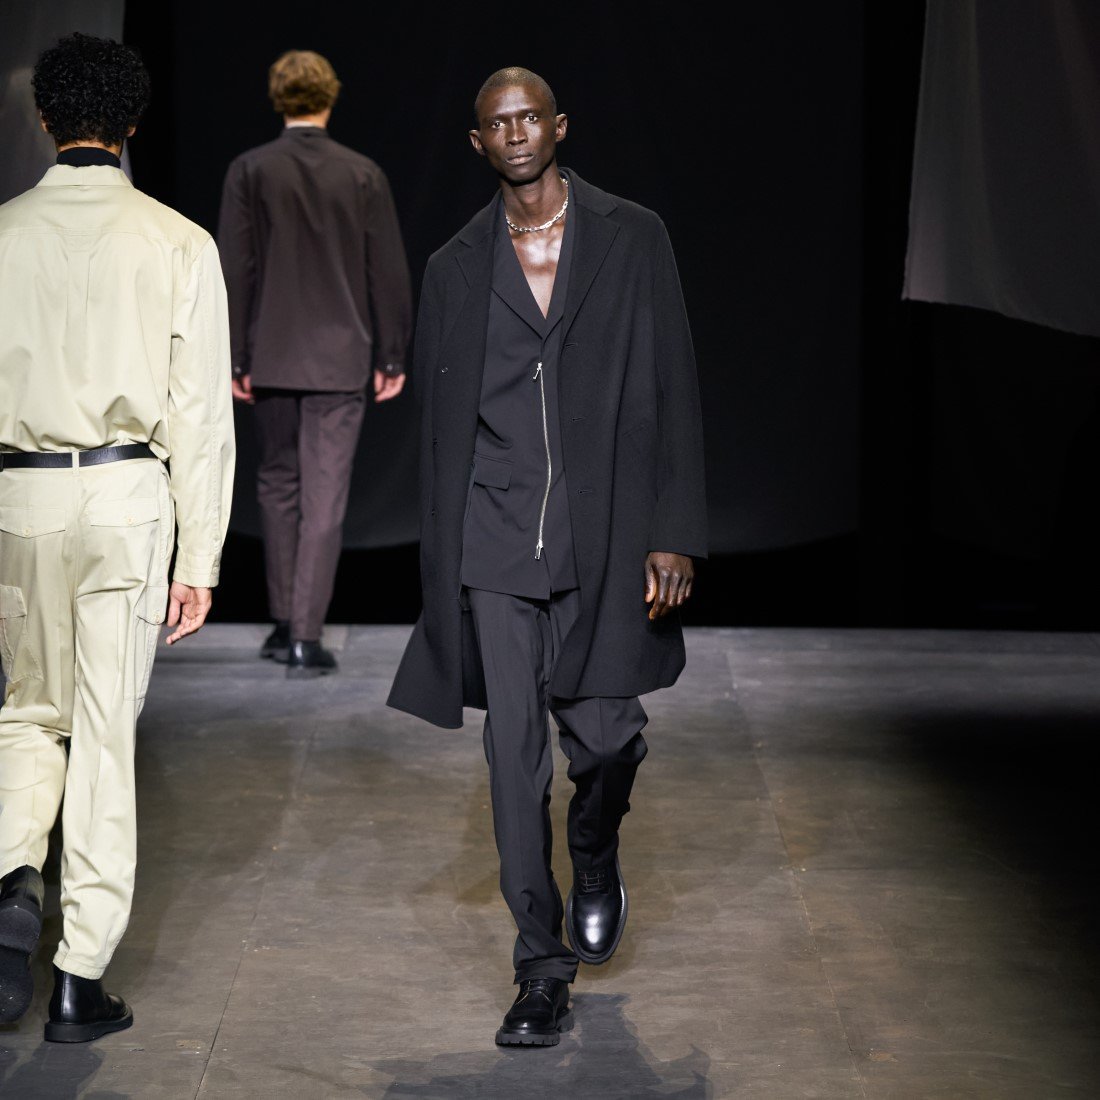 COS - Automne-Hiver 2021-2022 - London Fashion Week